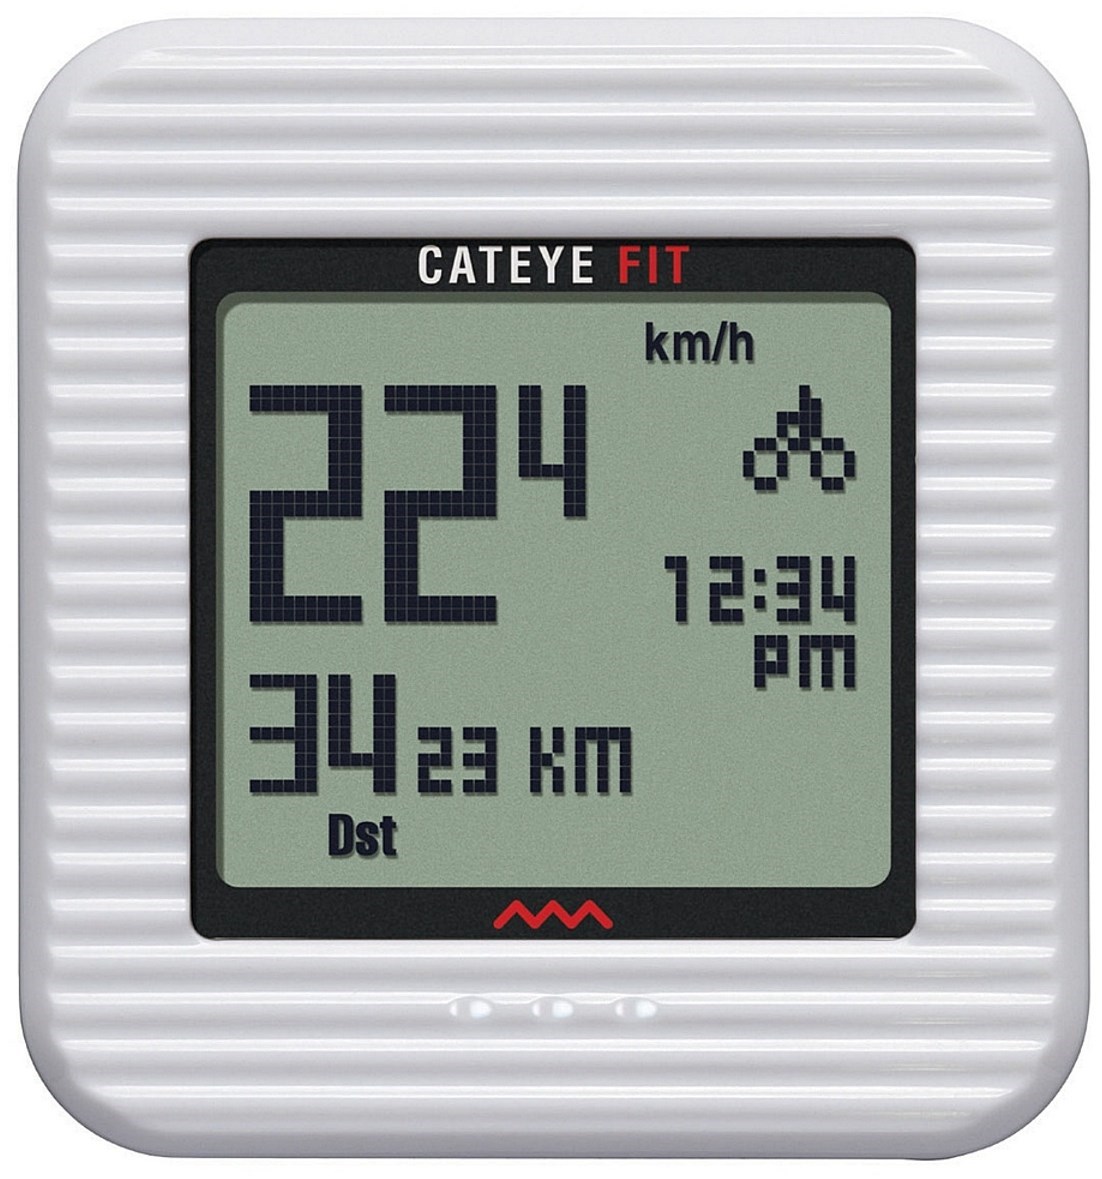 Cateye Fit Computer product image